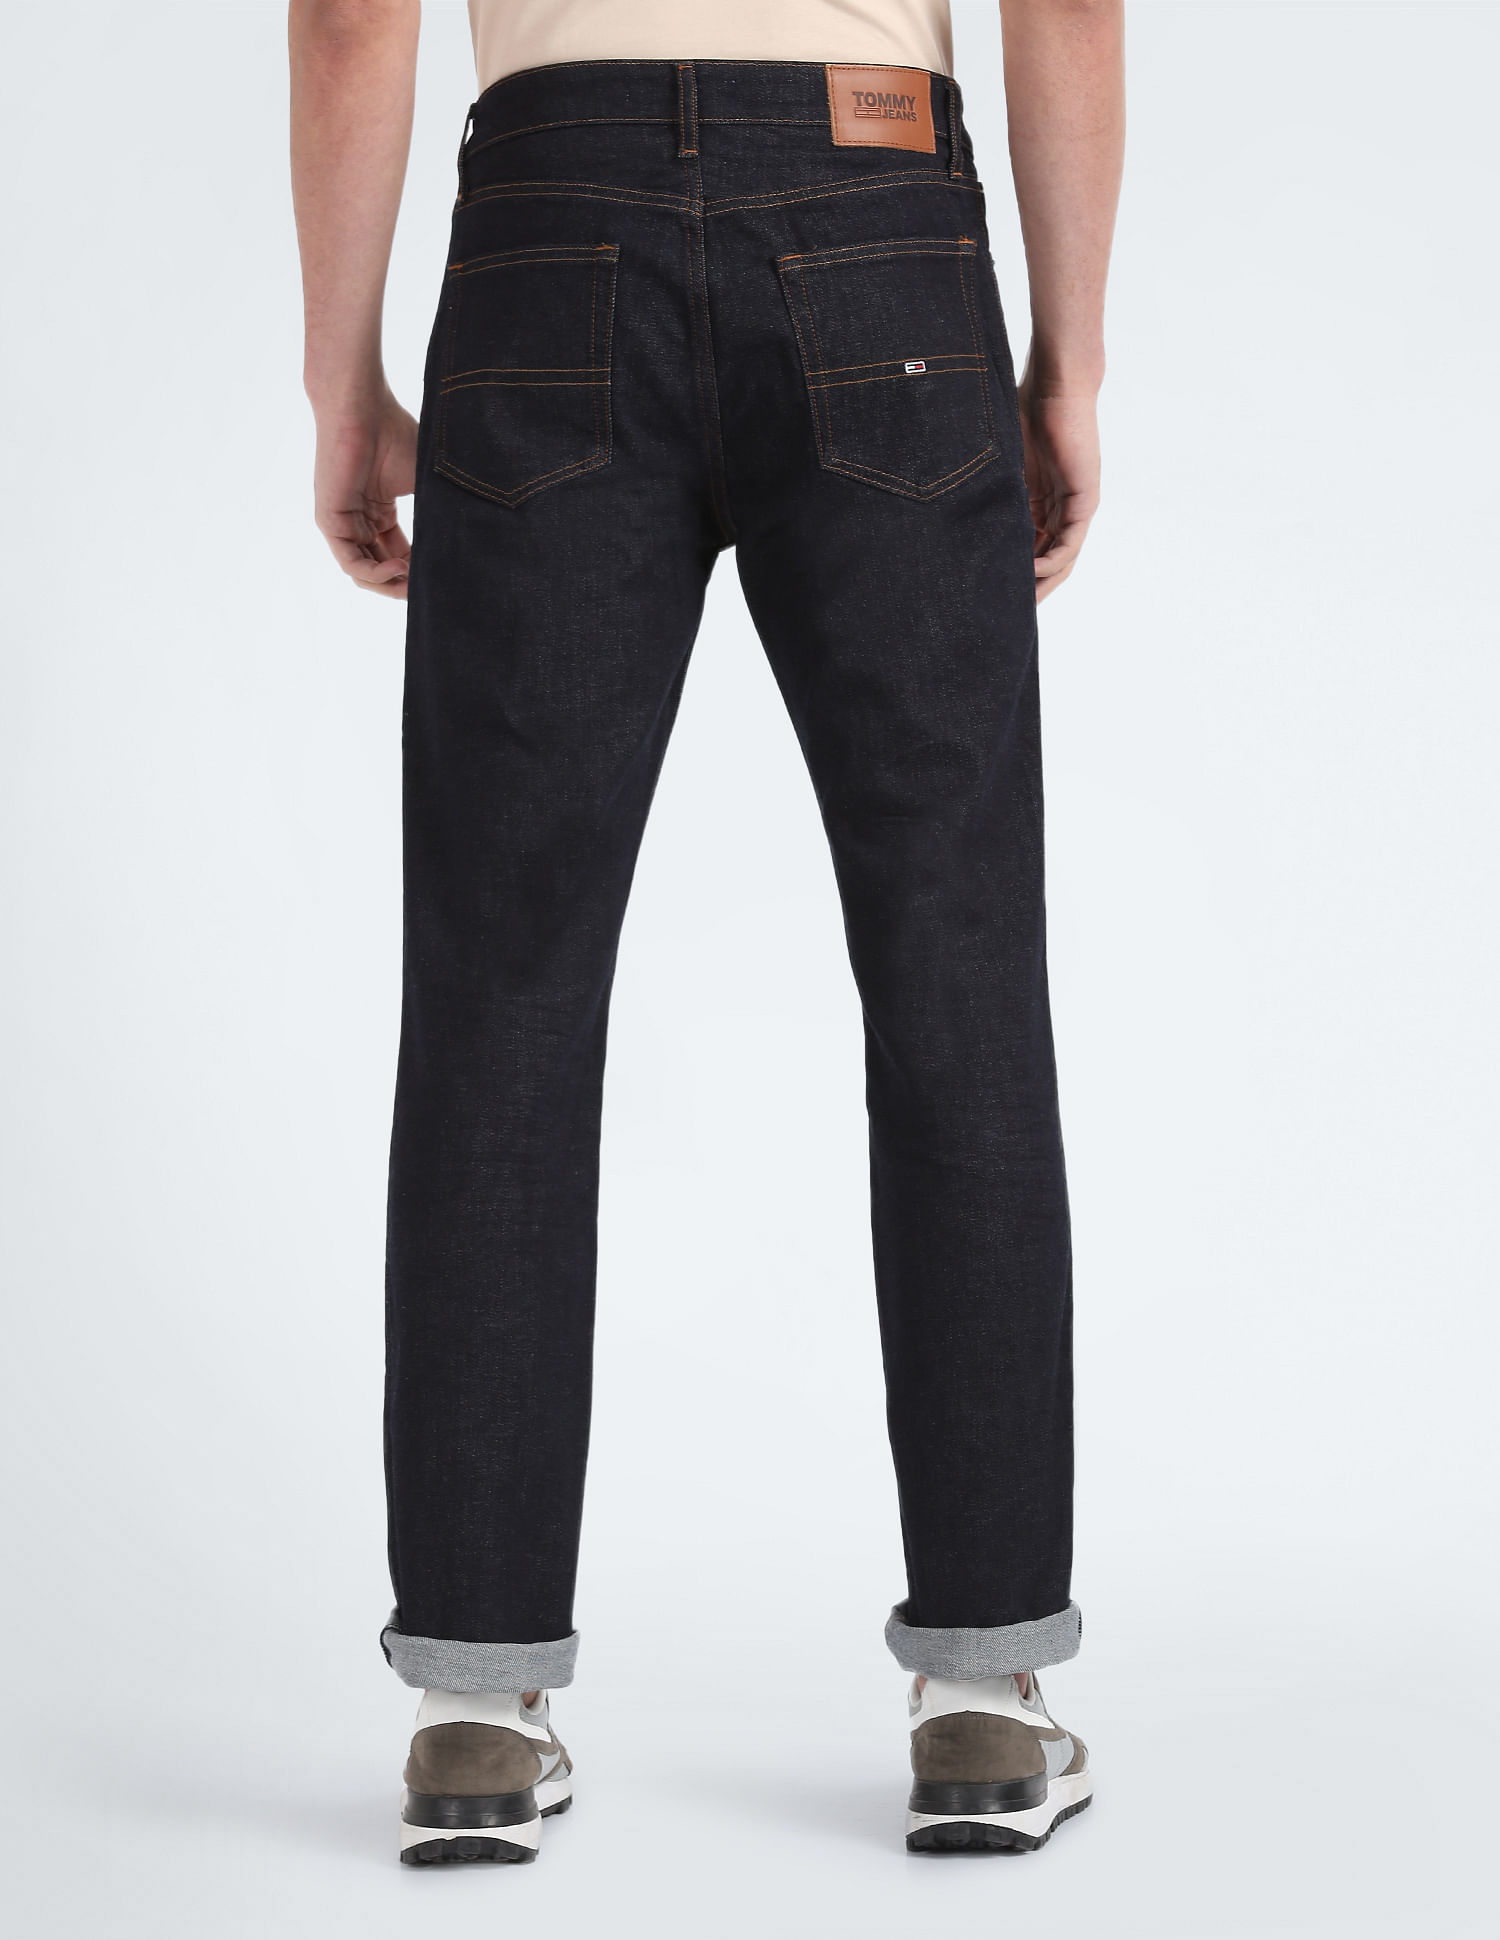 Buy Tommy Hilfiger Ryan Regular Straight Fit Rinsed Jeans - NNNOW.com